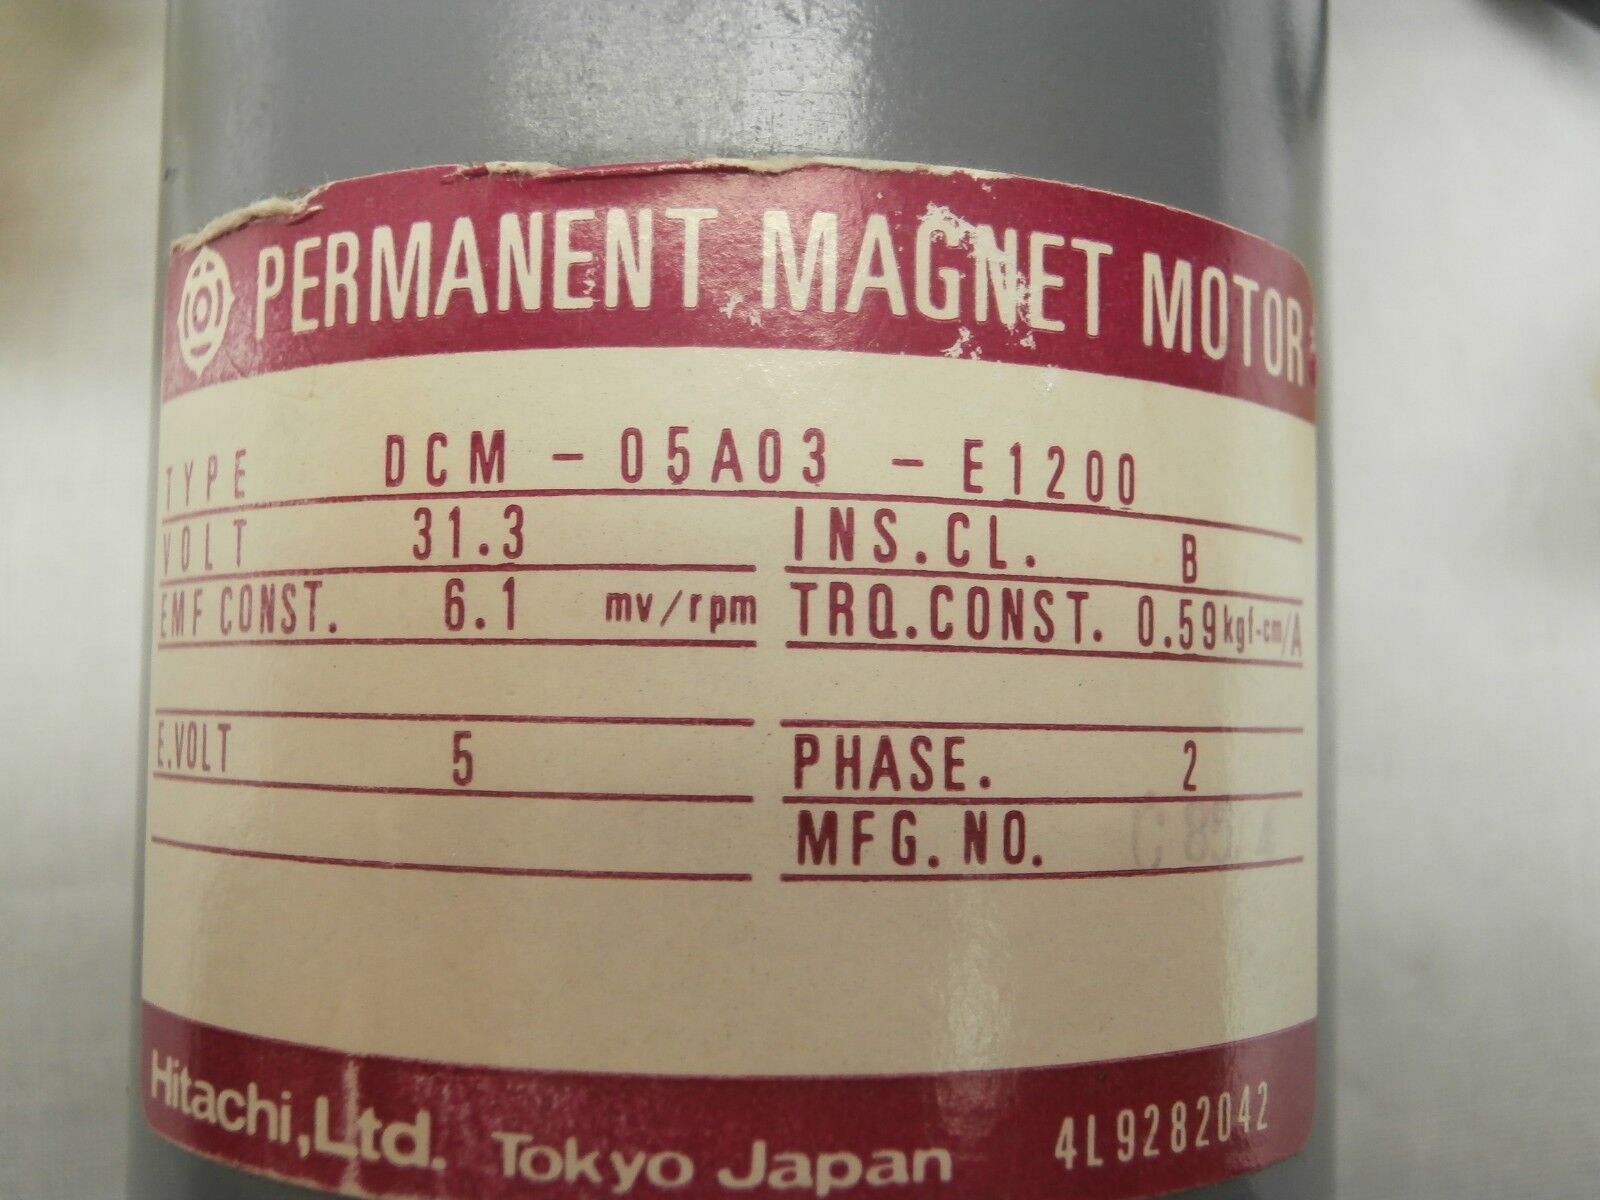 Hitachi DCM-05A03-E1200 Permanent Magnet Motor Used Working